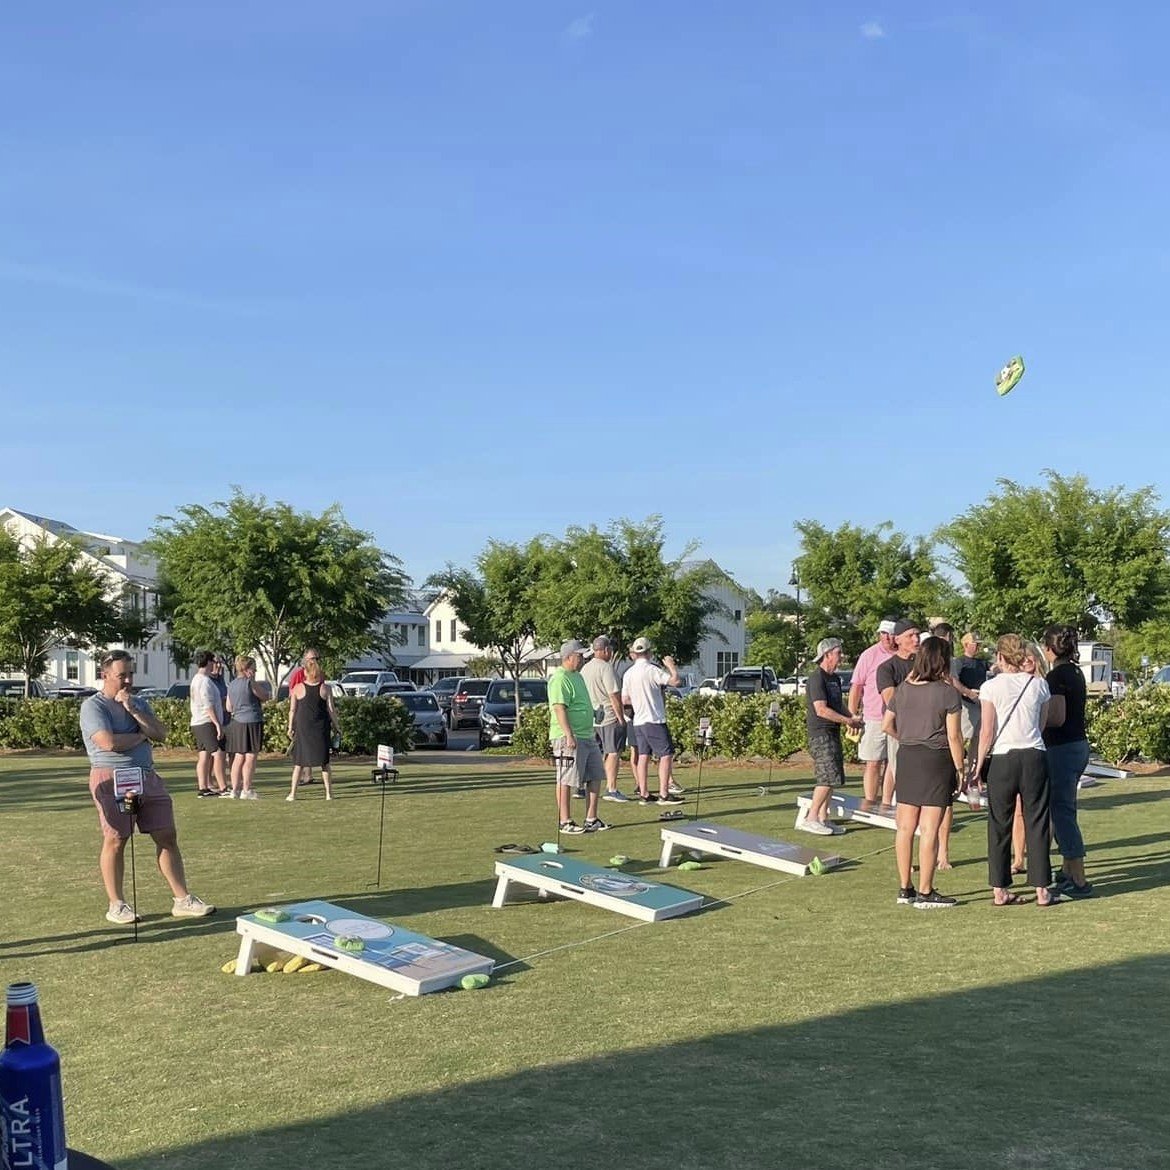 Olde Blind Dog Cornhole Summer registration is OPEN! Hurry and sign up now as registration closes on May 19th. League play starts on May 23 and seasons end on July11. 

Registration: https://bit.ly/3WyWRvc